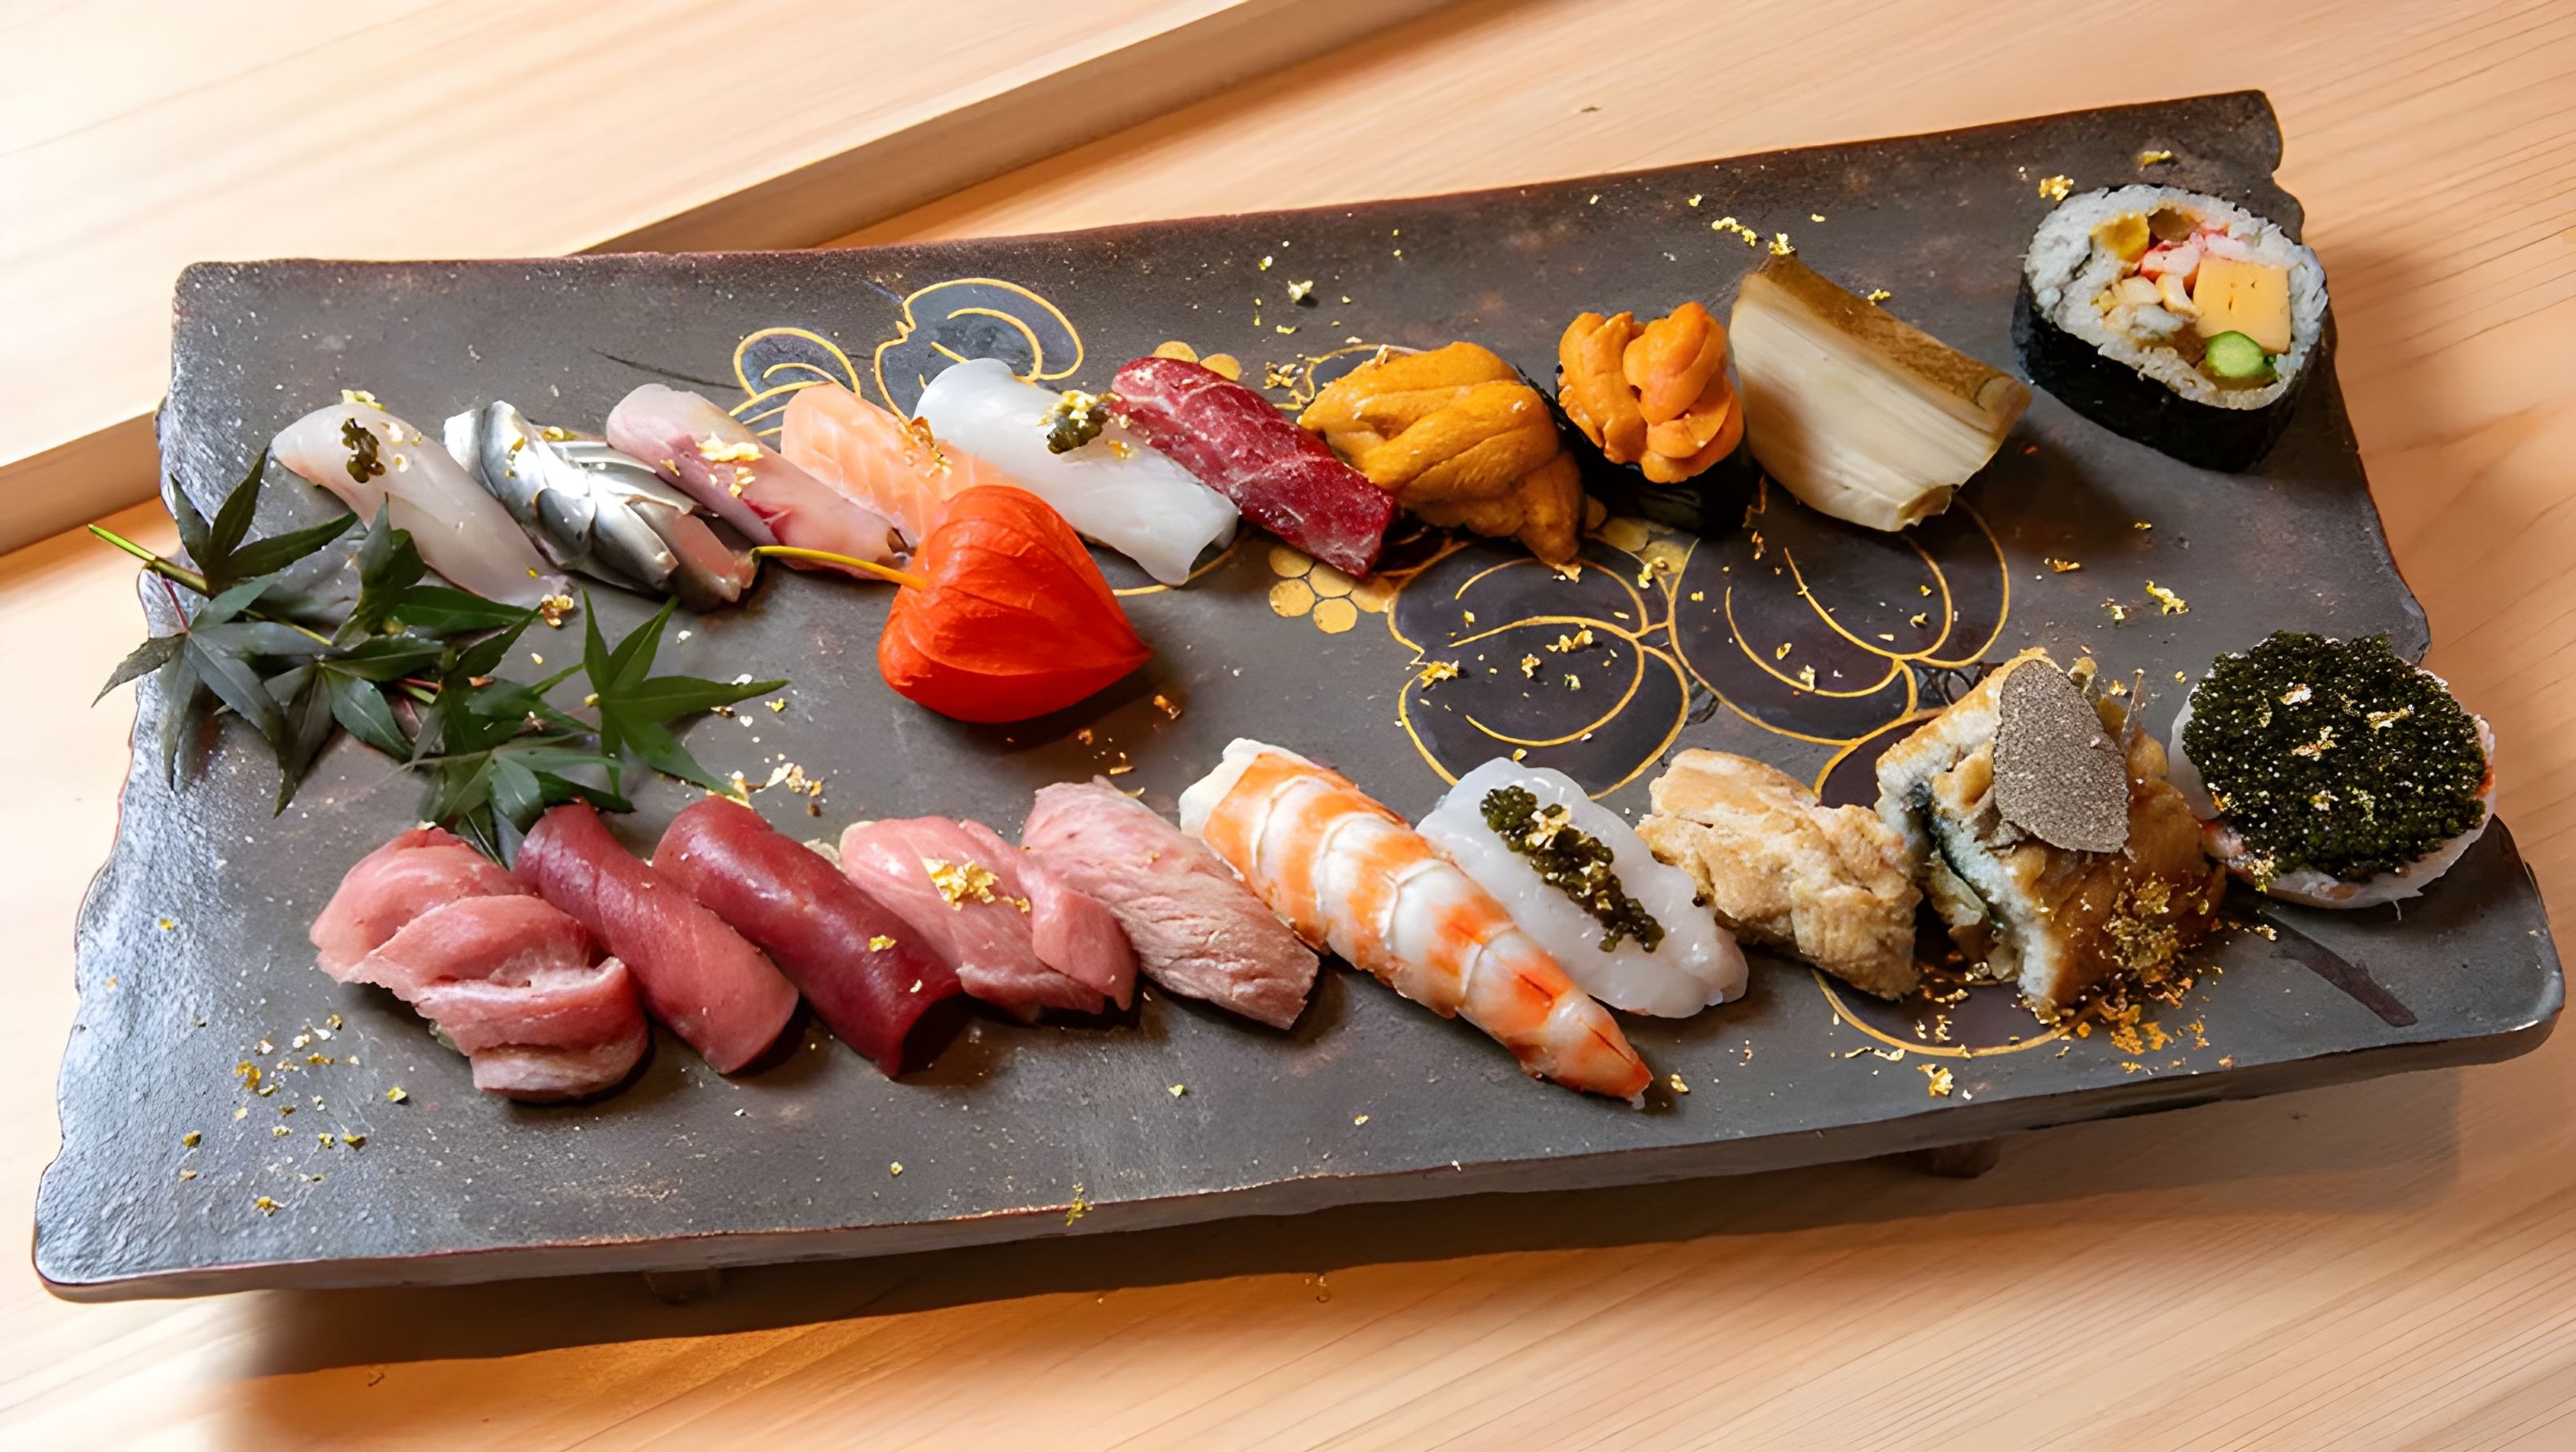 World’s most expensive sushi, priced at Rs.2,01,332 served up at a Japanese restaurant.